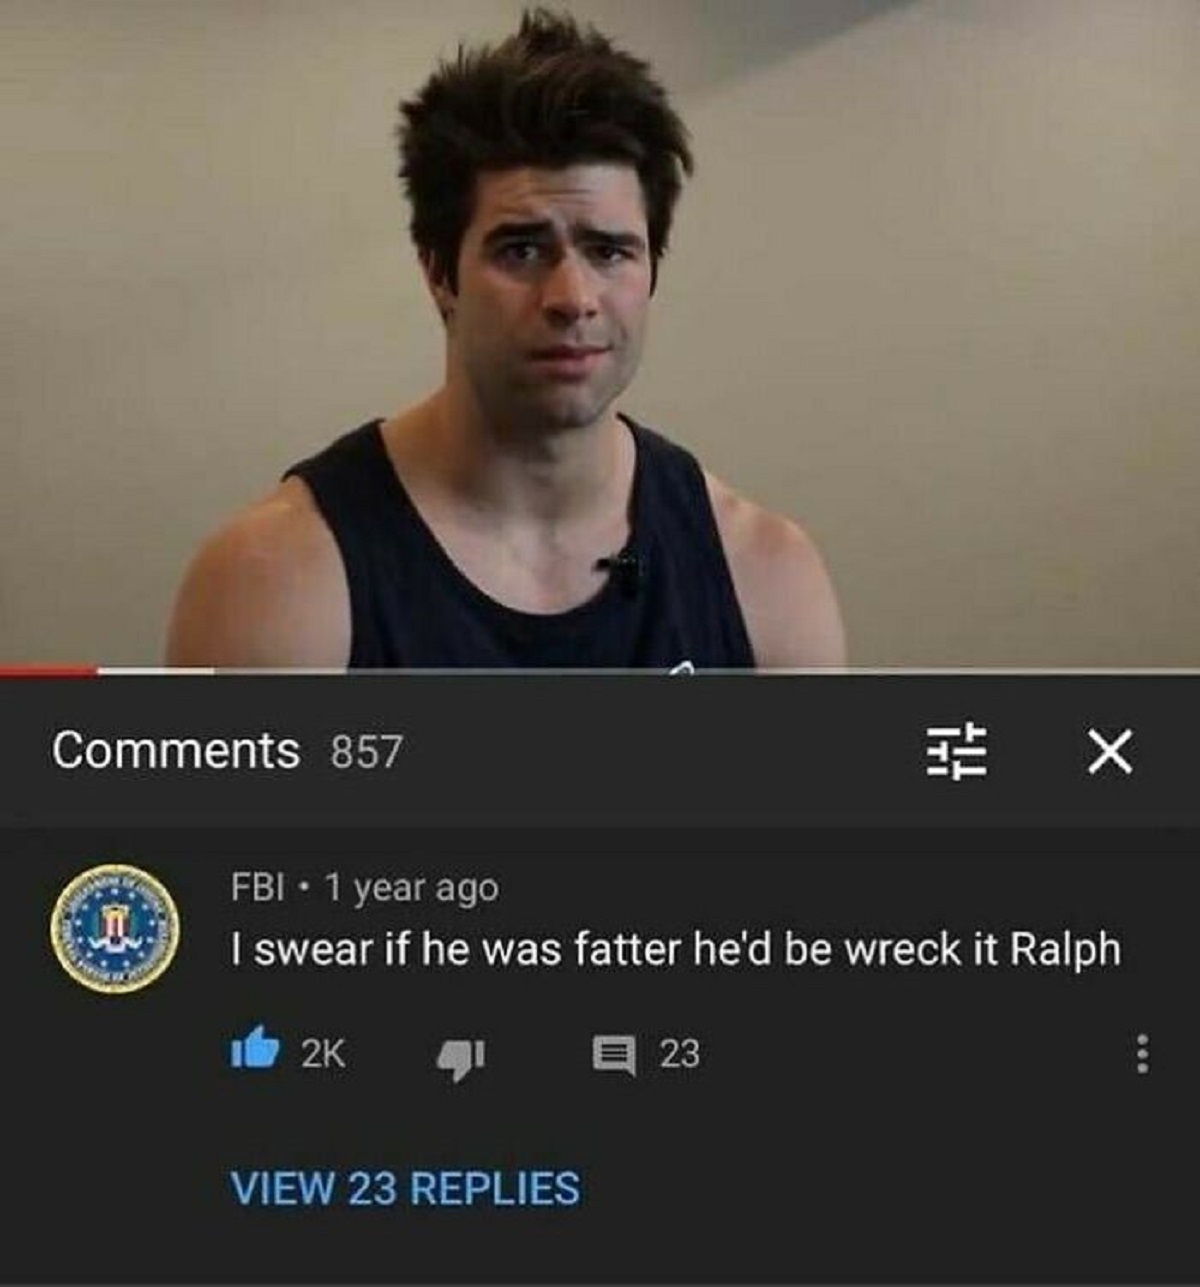 funny youtube comments - 857 Fbi 1 year ago I swear if he was fatter he'd be wreck it Ralph 12K 23 View 23 Replies